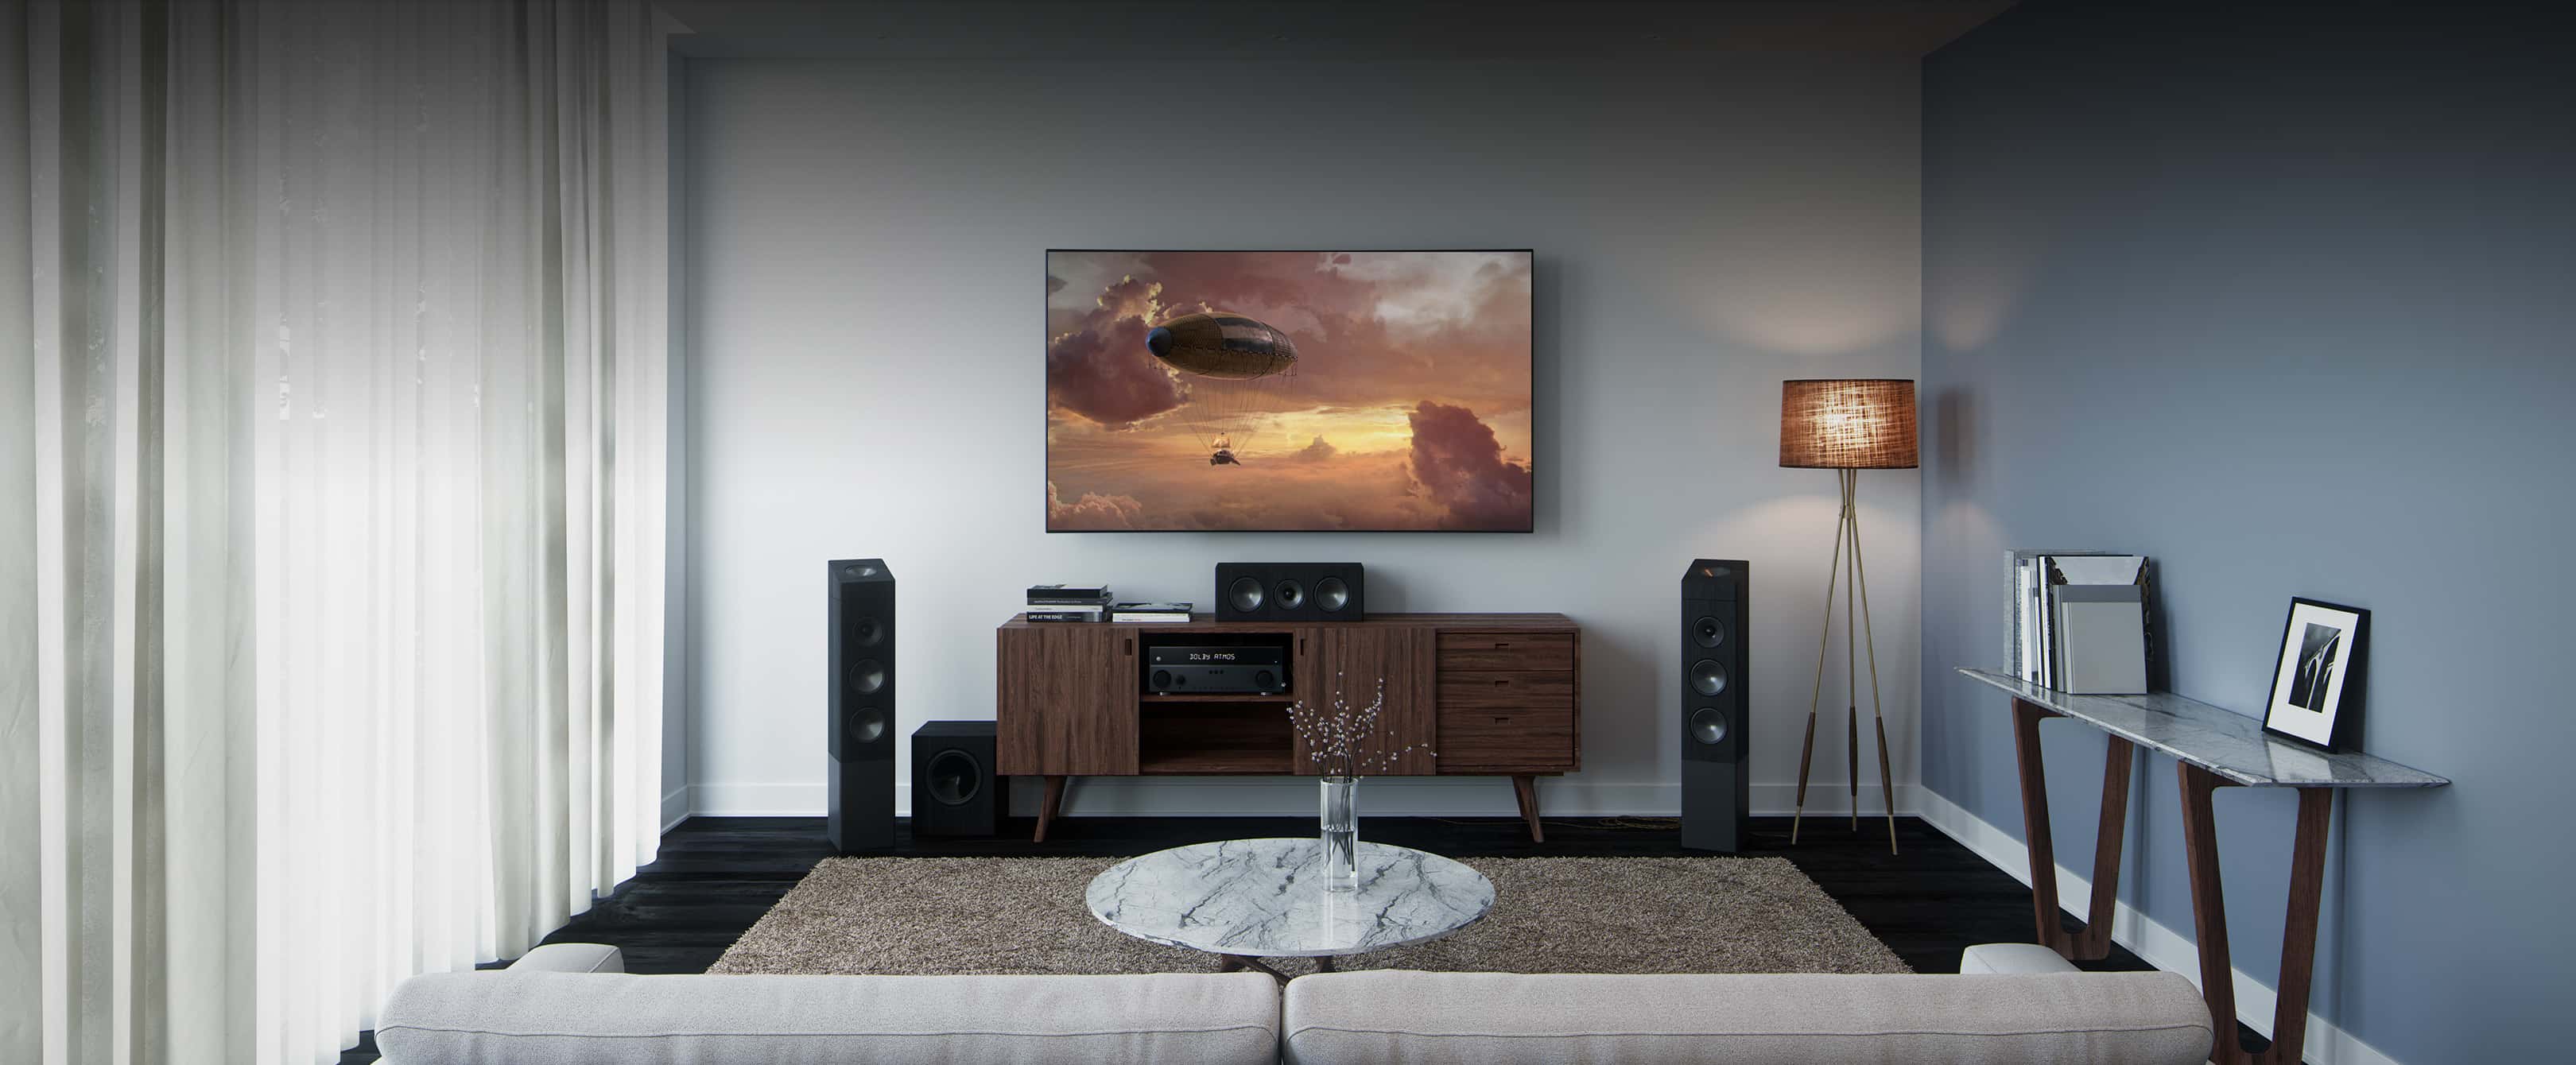 Dolby Atmos: The ins, outs and sounds of the object-based surround